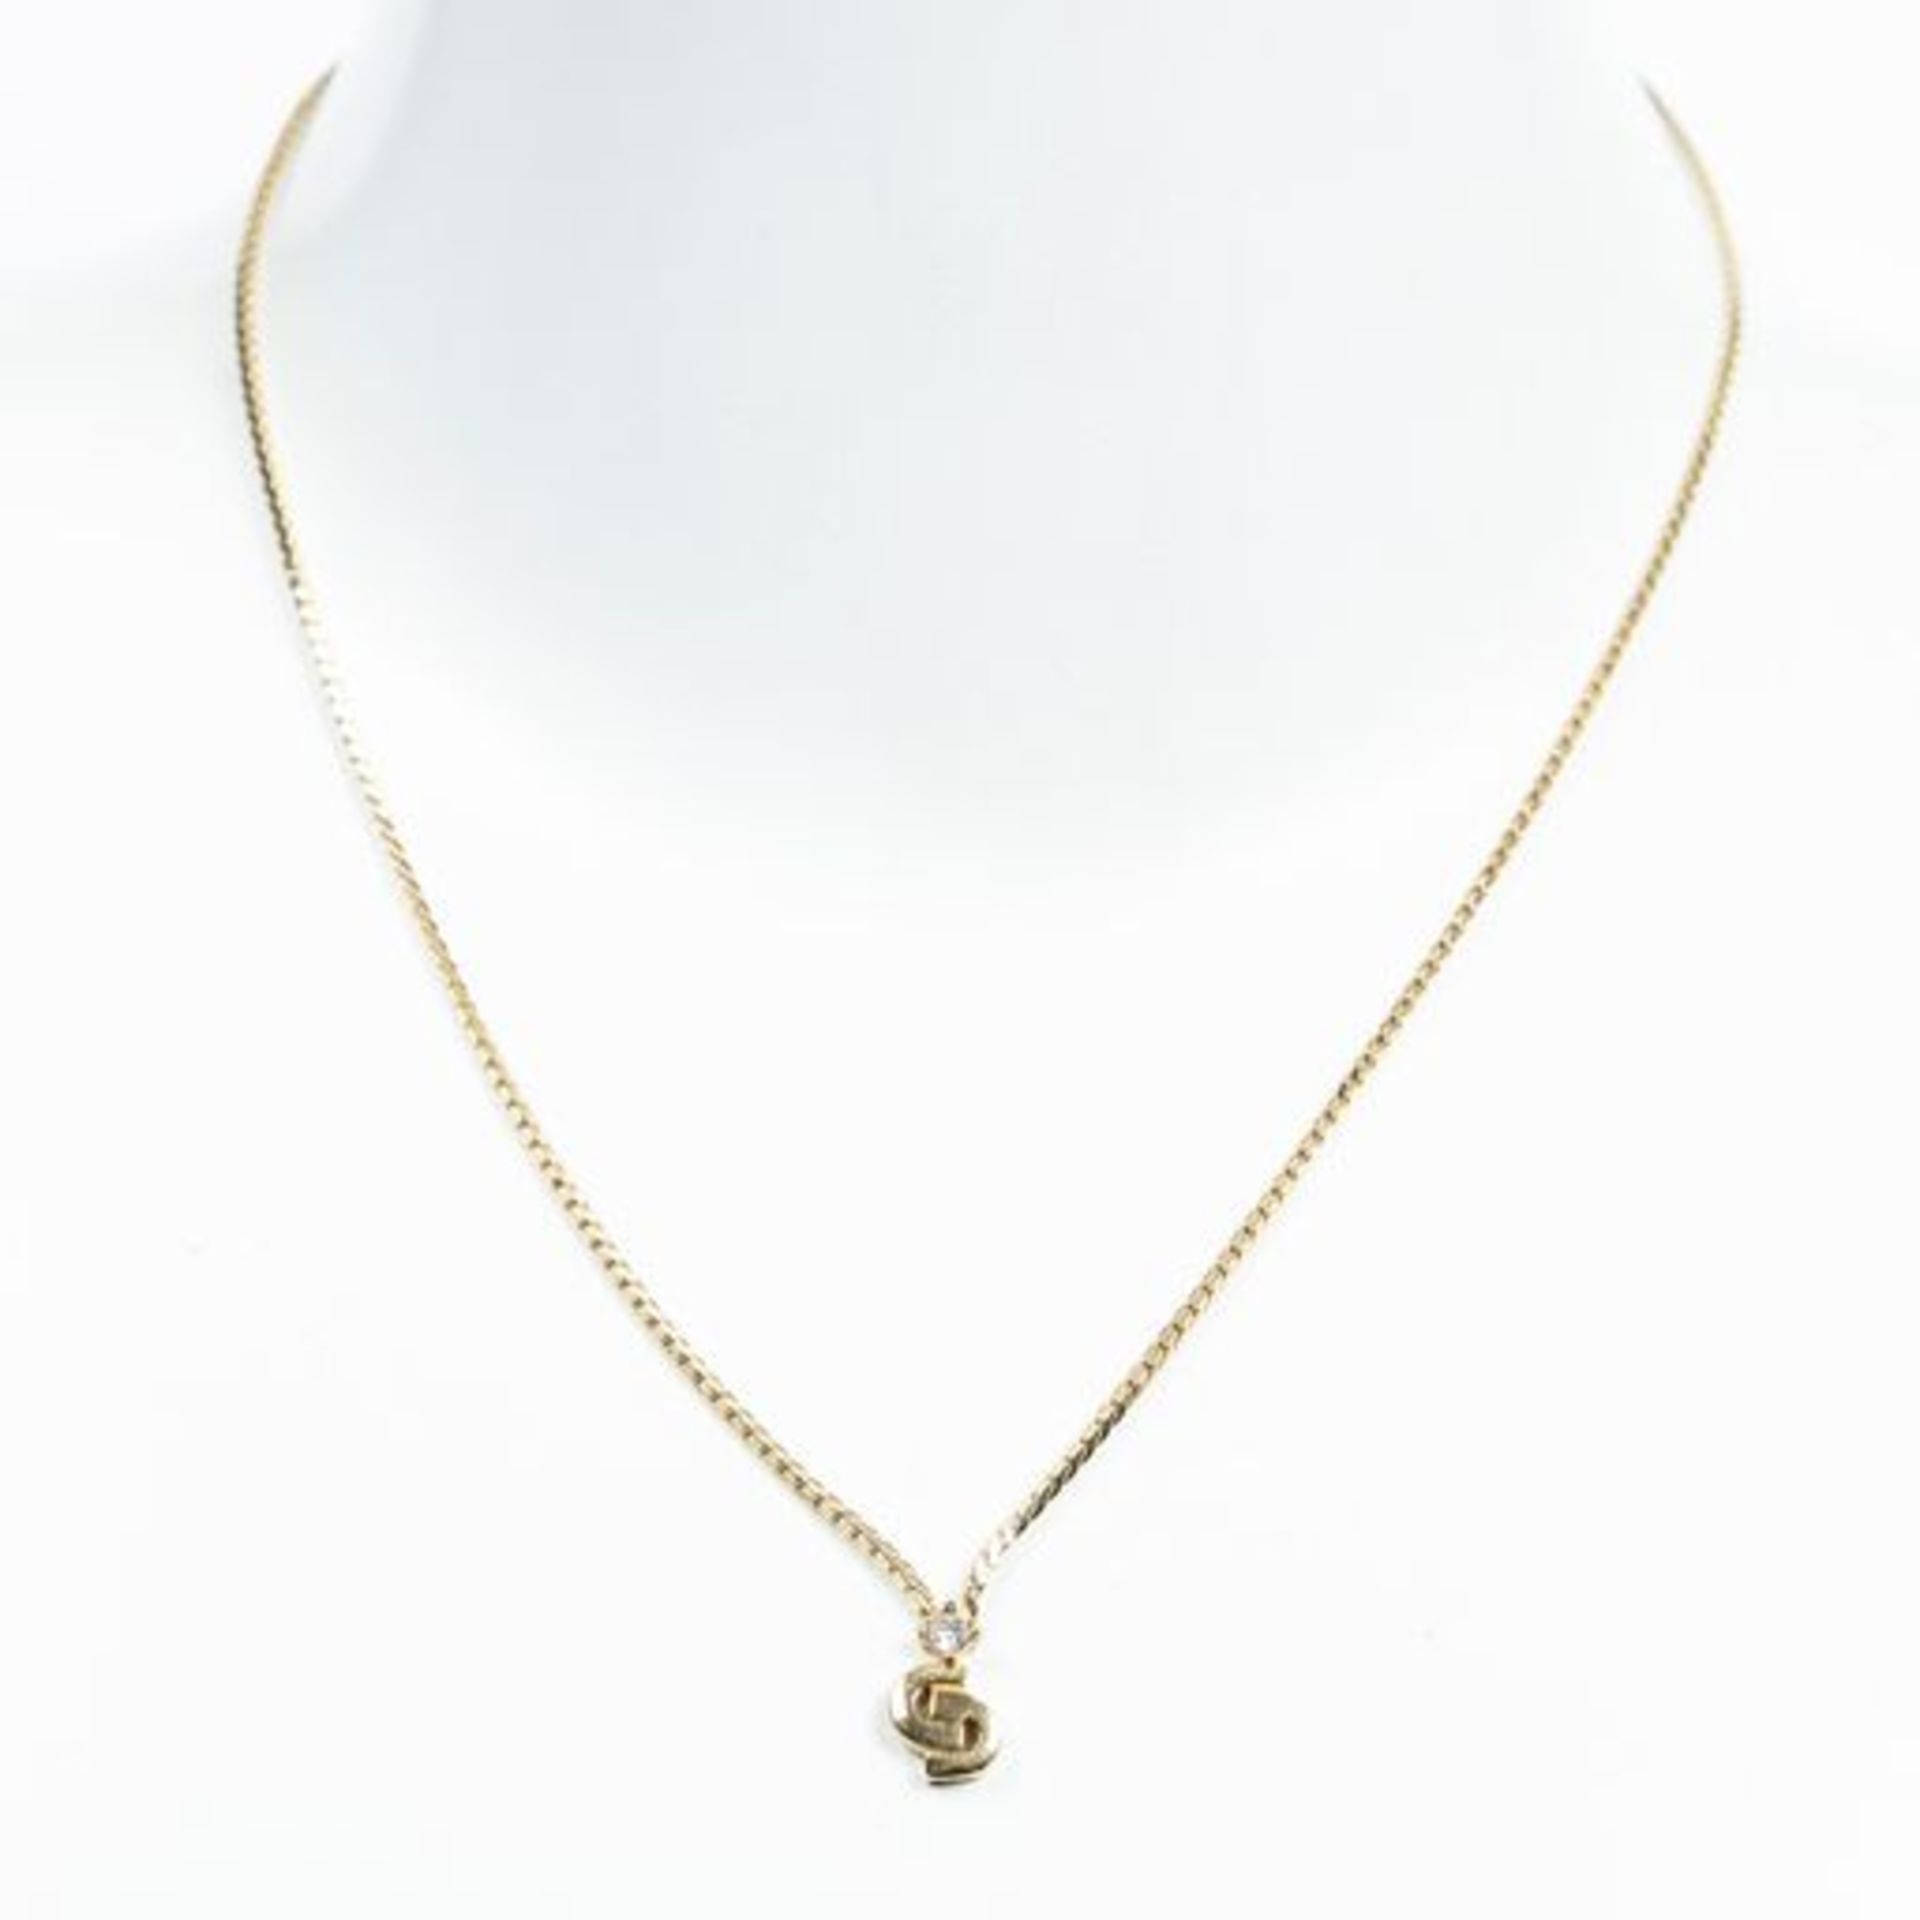 RRP £825 Dior Logo Necklace Gold - AAR2369 - Grade A - (Bags Are Not On Site, Please Email For